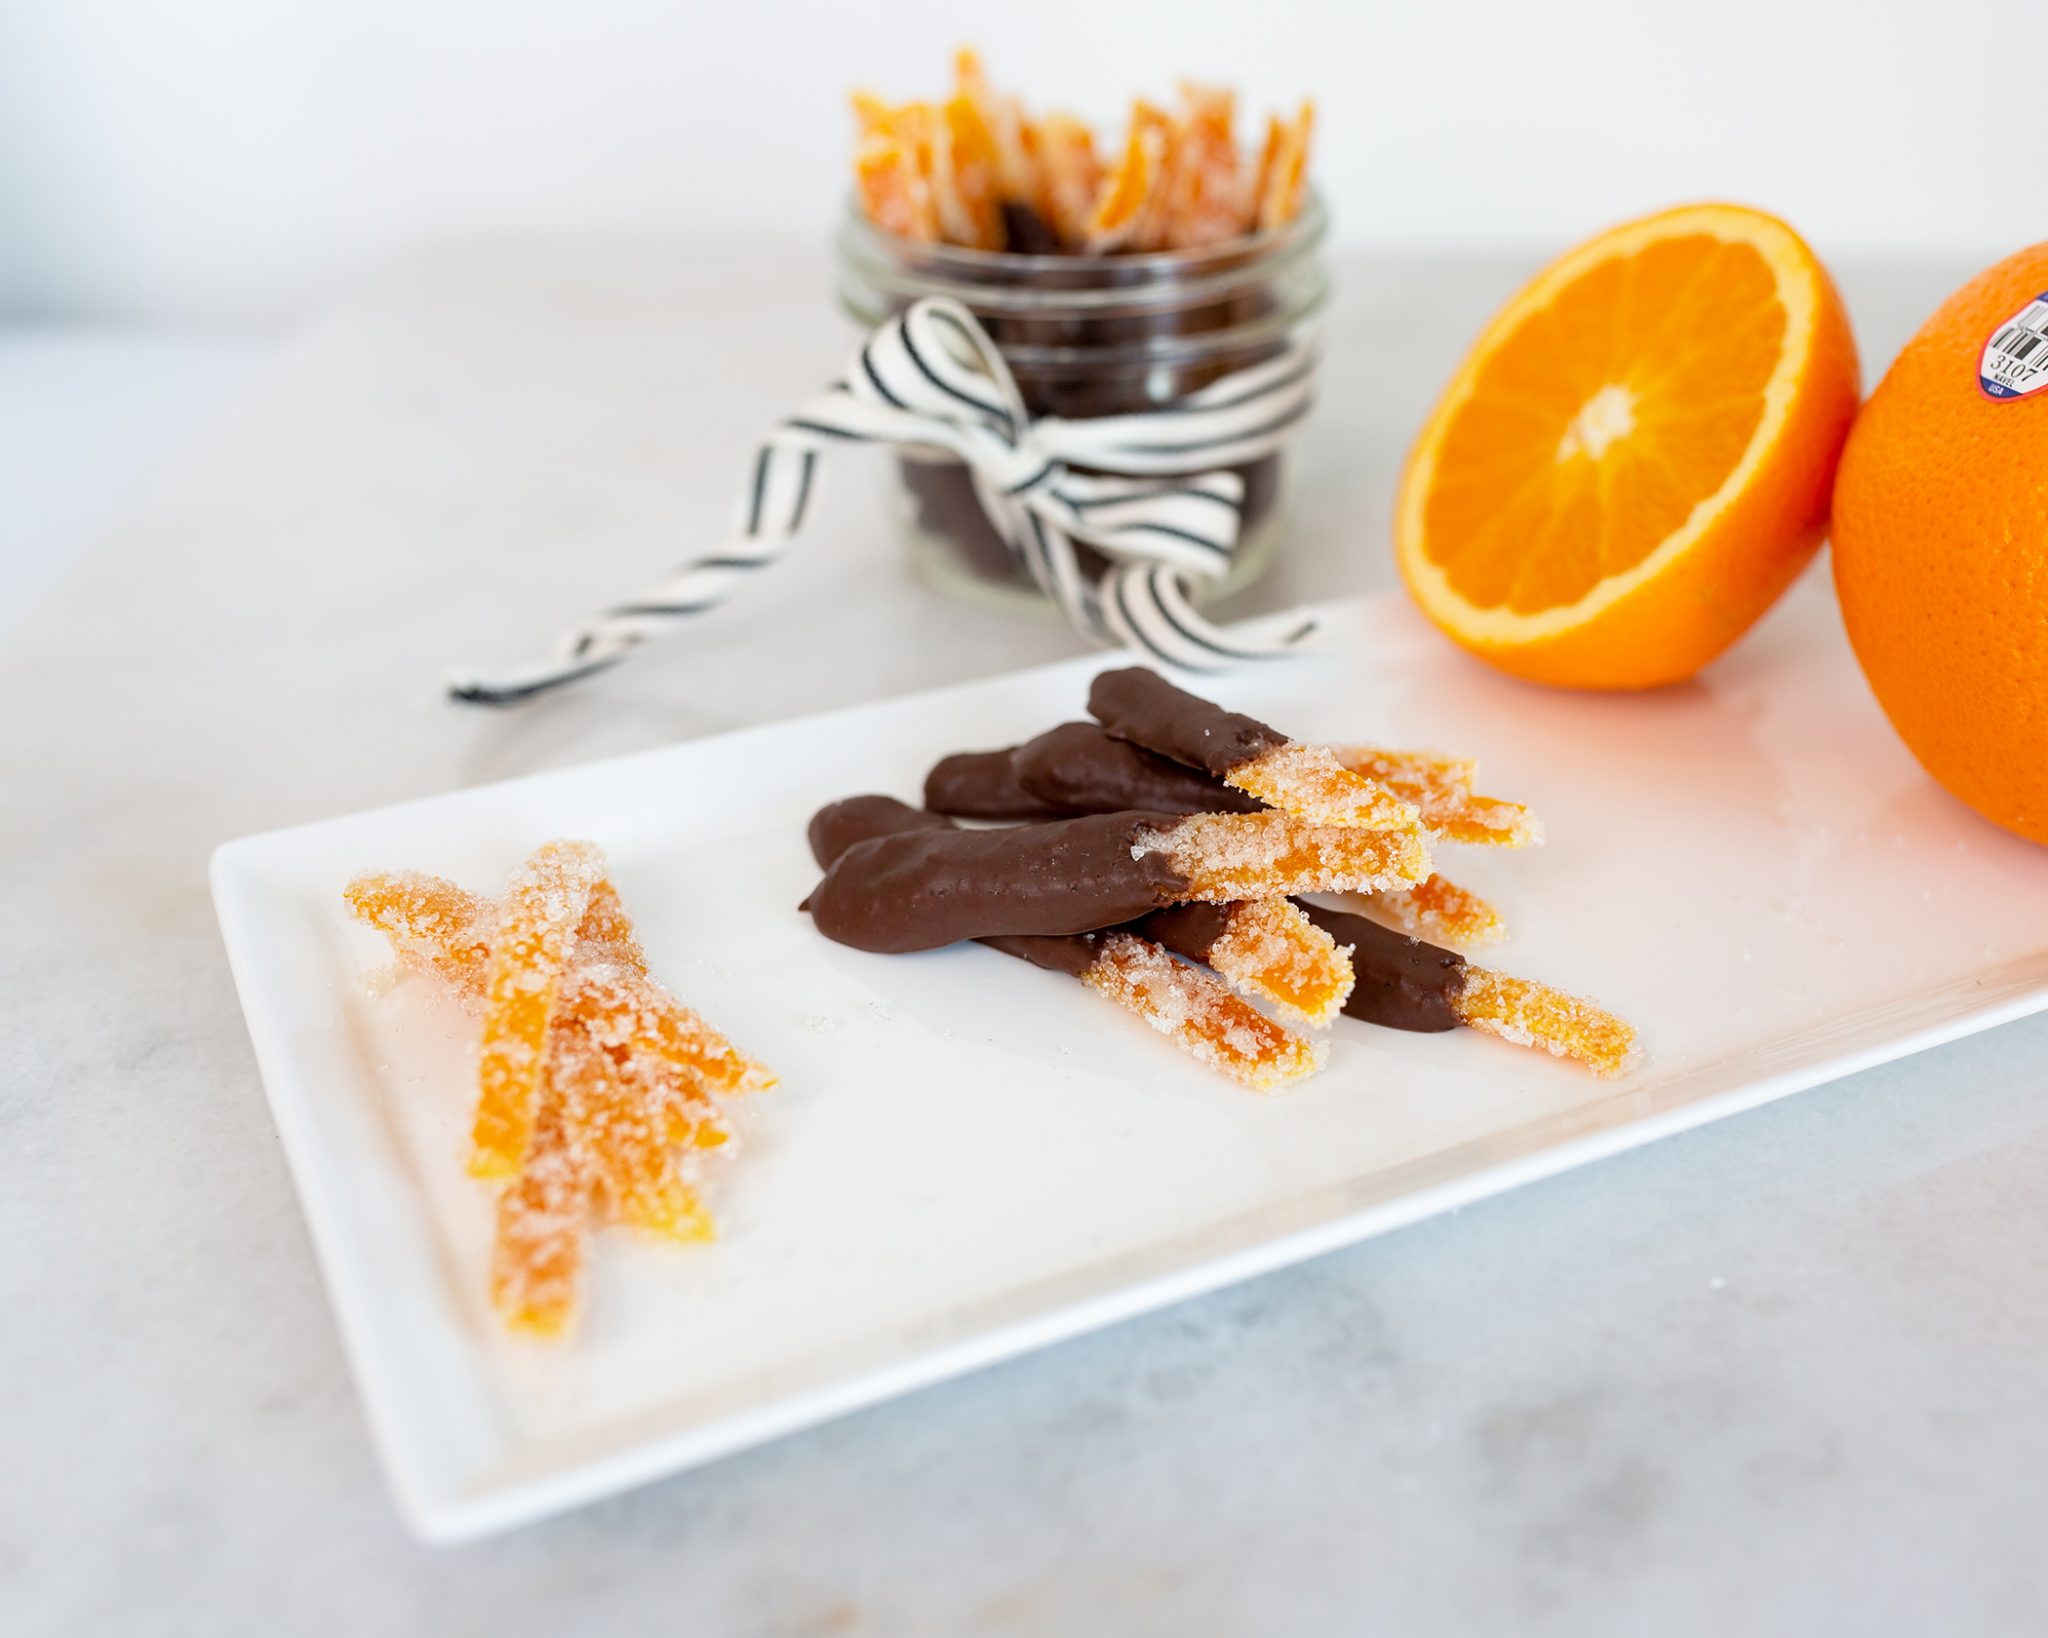 Recipe With Video Chocolate Dipped Candied Orange Peels Tbr News Media